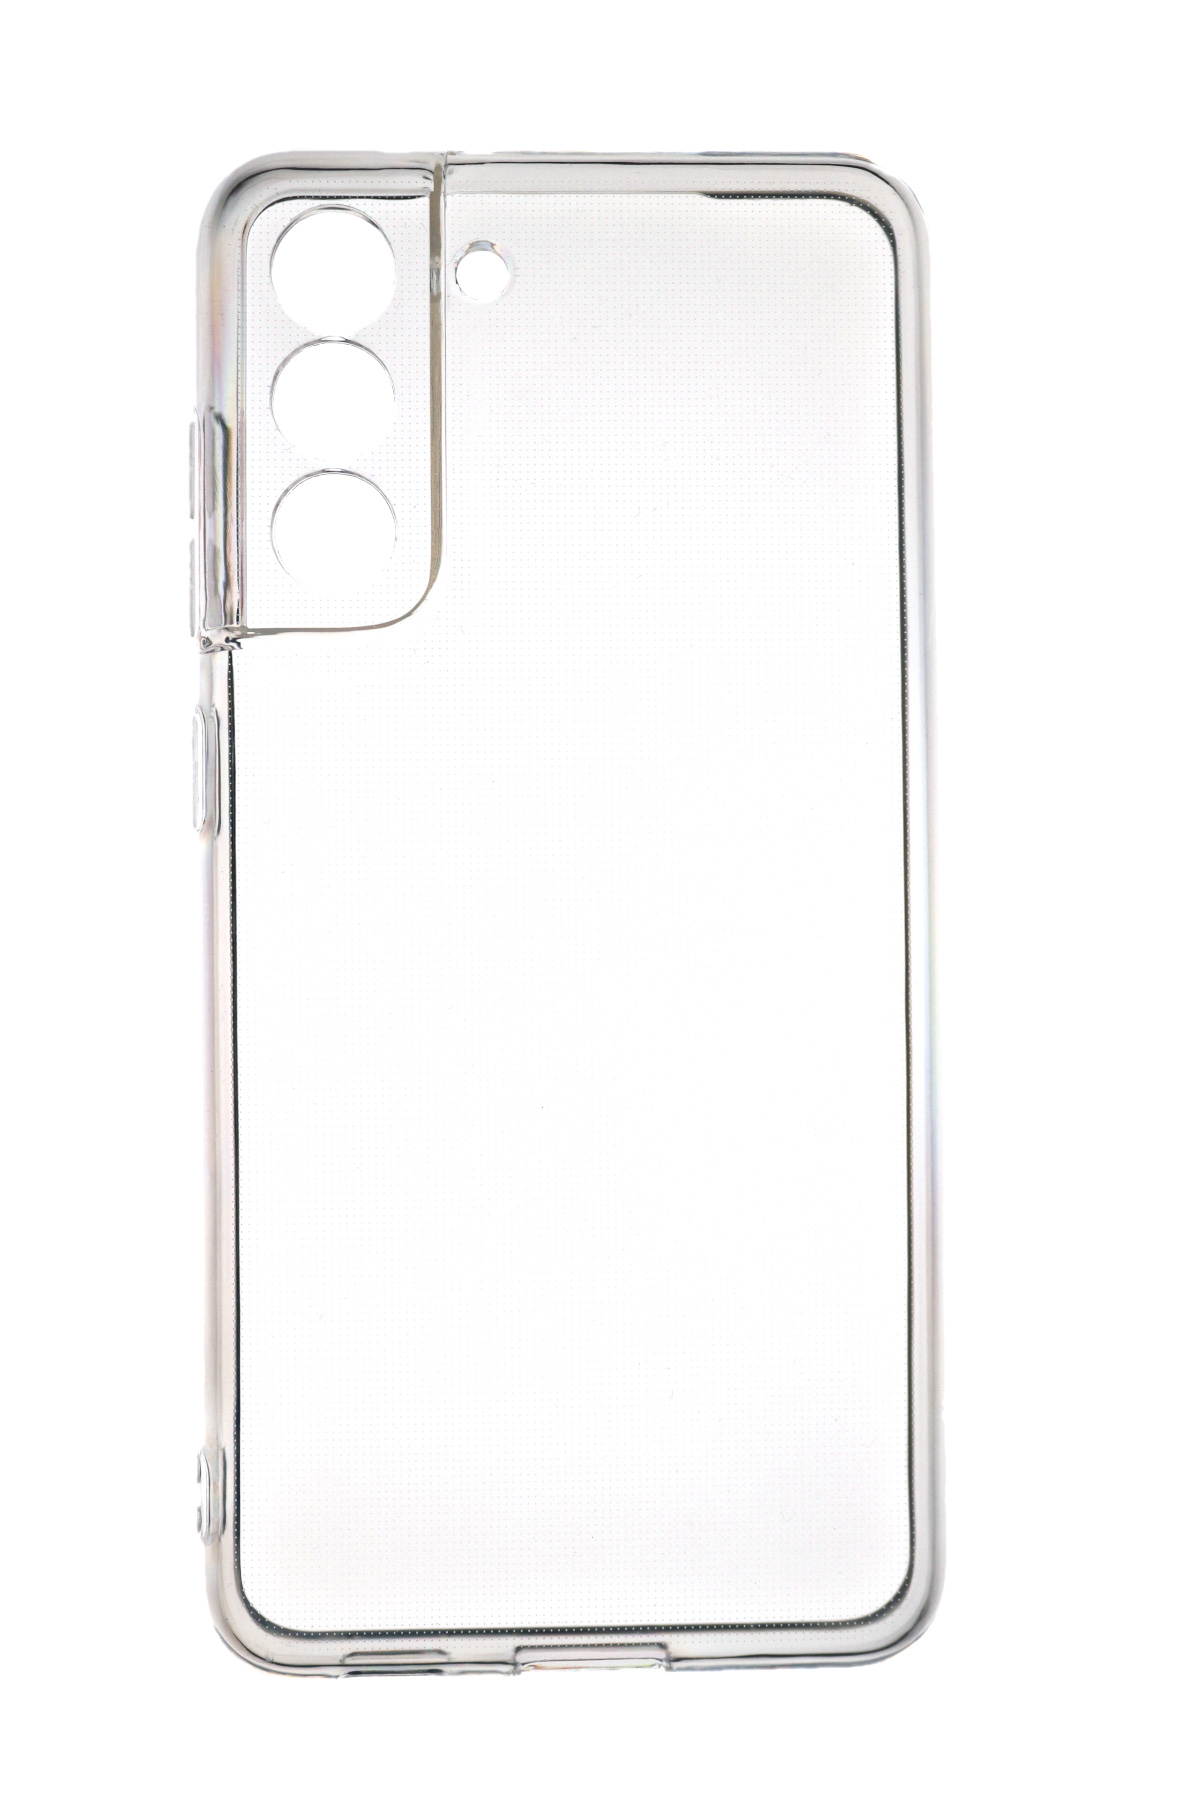 2.0 FE, Galaxy JAMCOVER Backcover, Case mm TPU Transparent Samsung, Strong, S21